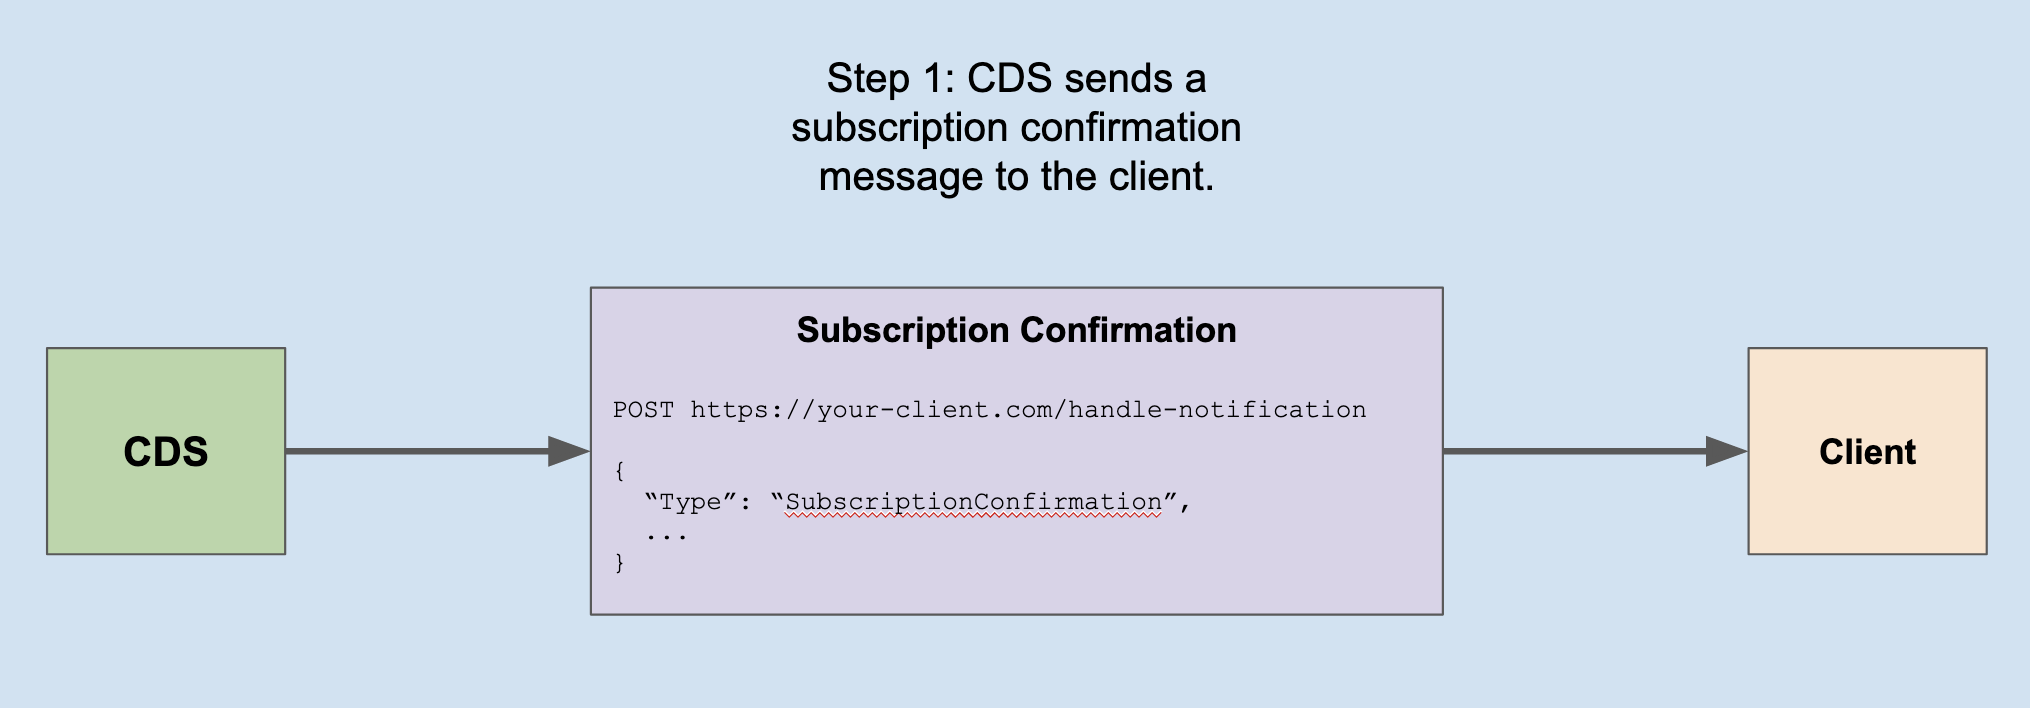 Subscription confirmation step 1